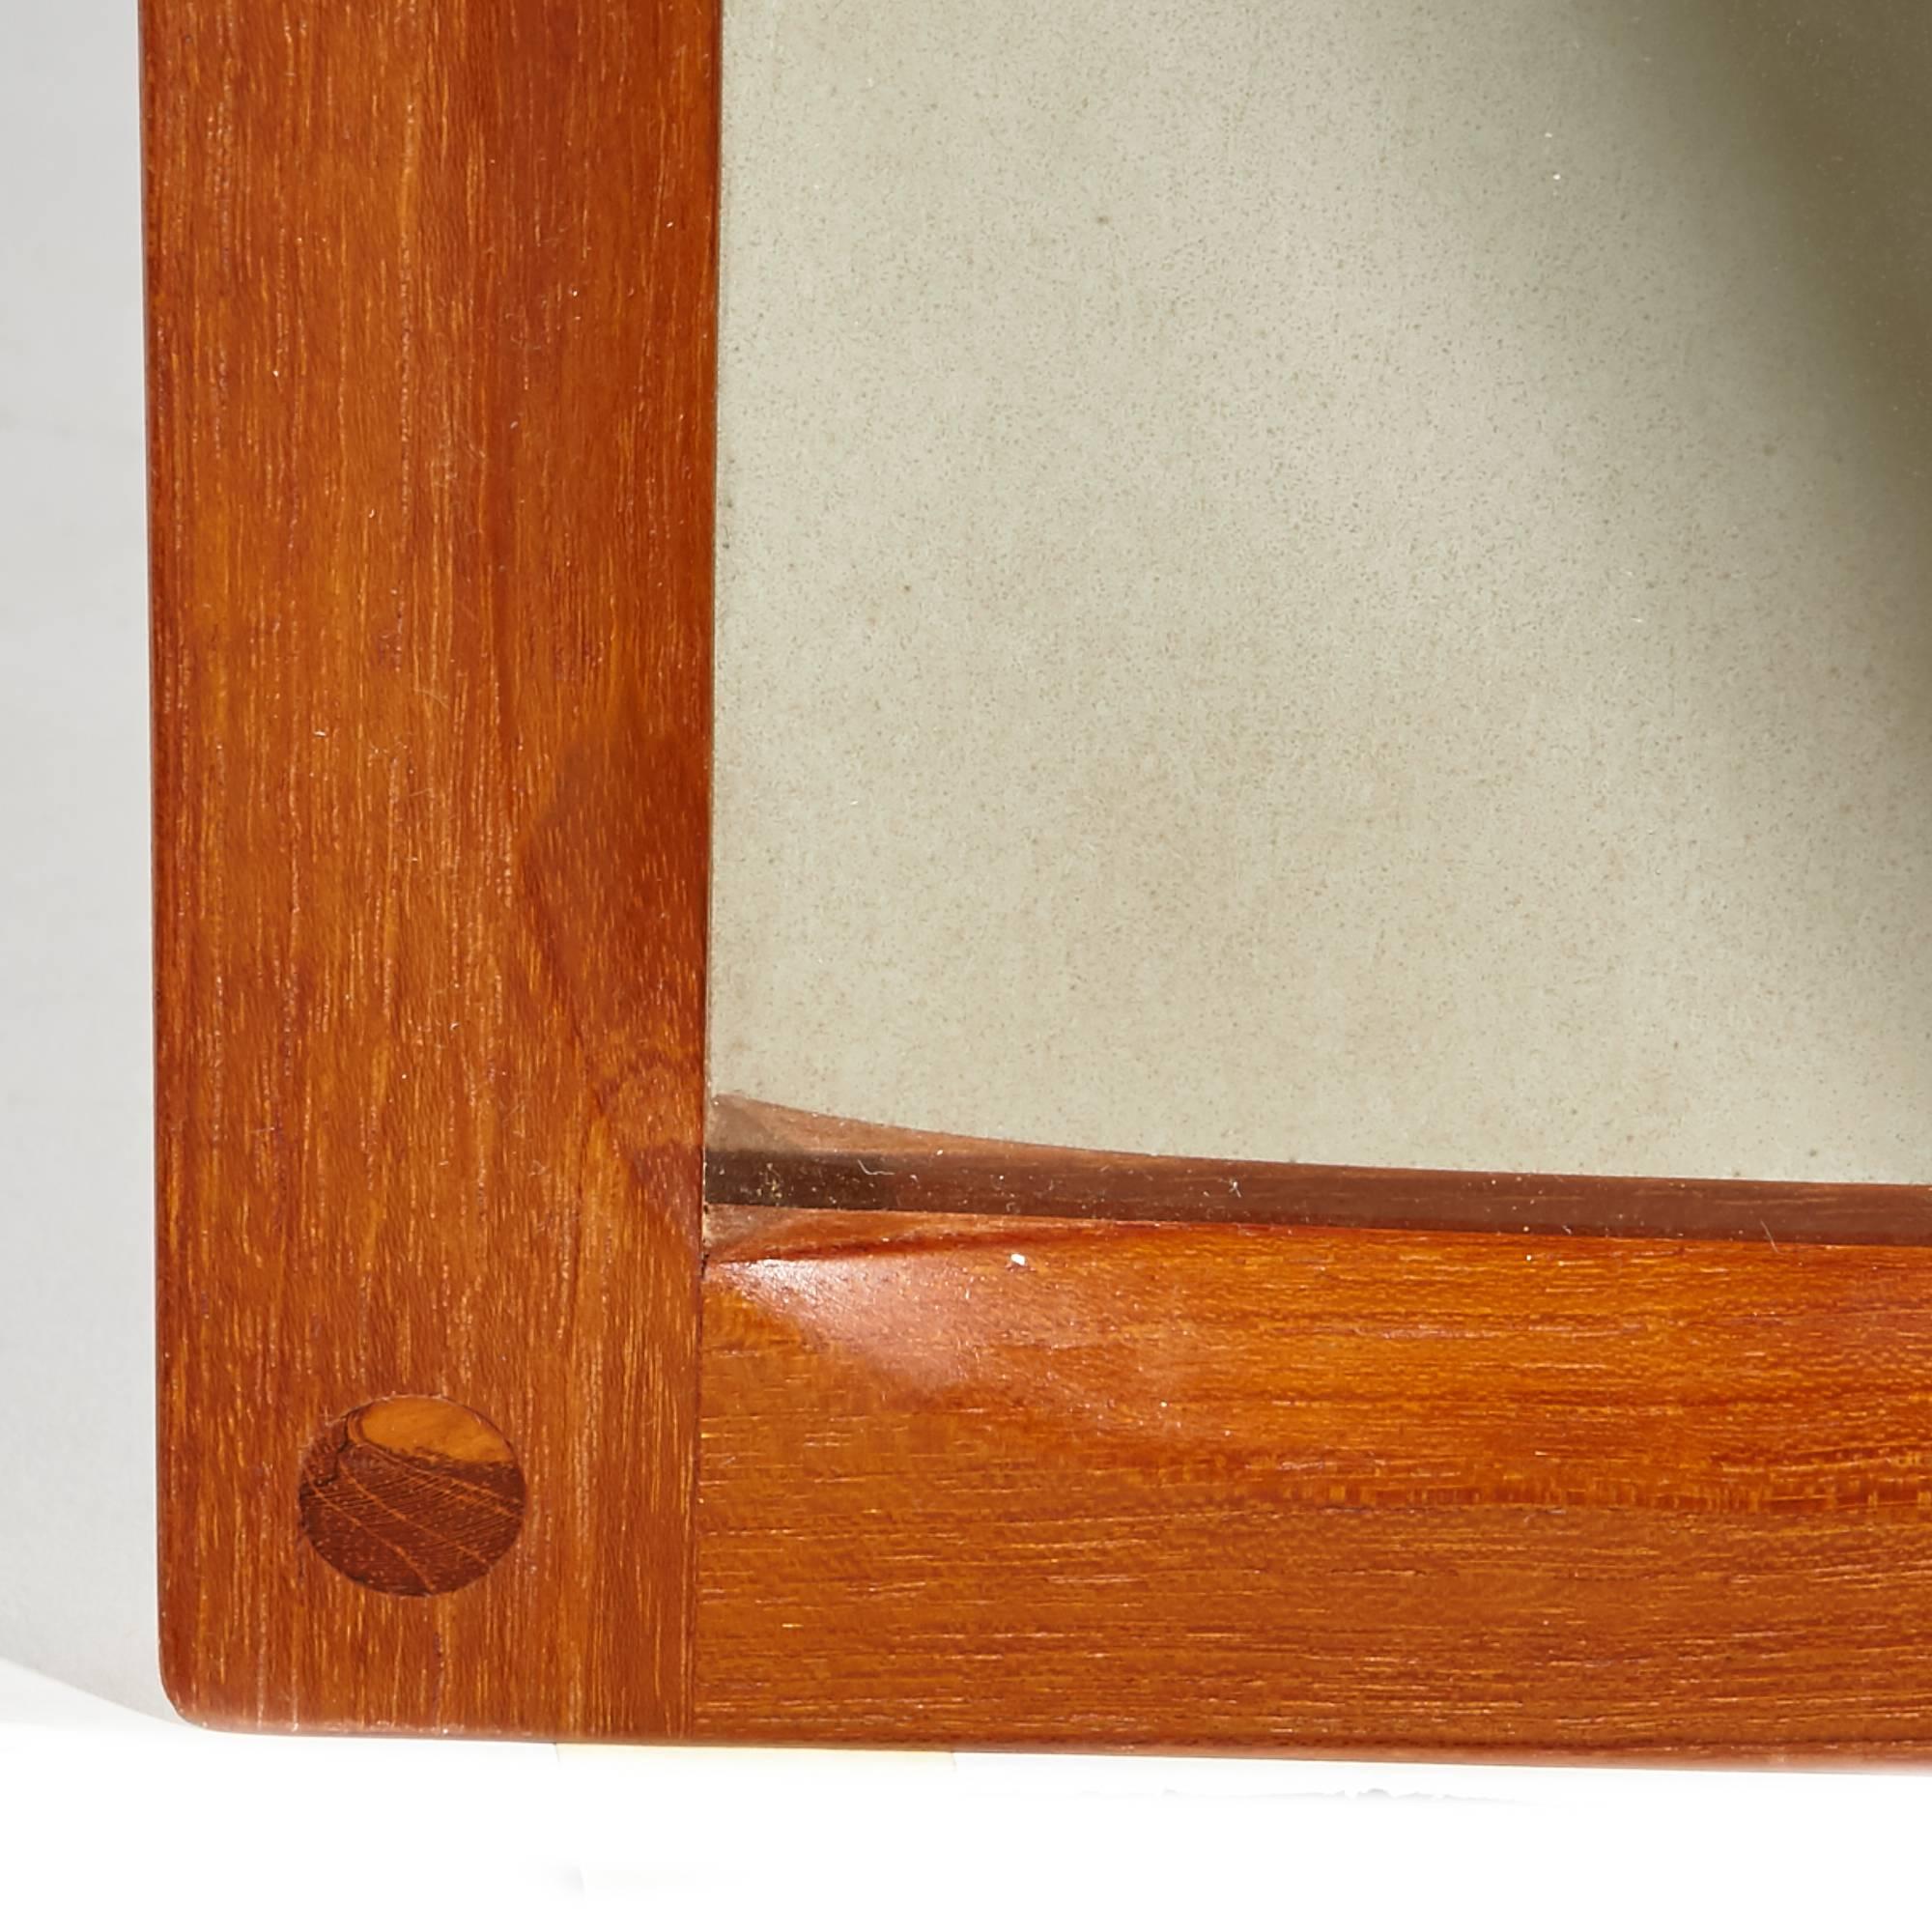 Vintage 1960s Aksel Kjersgaard teak mirror by Odder of Denmark. Dovetailed joints. Mirror is very good condition with minor fogging. Brackets are included. Marked.